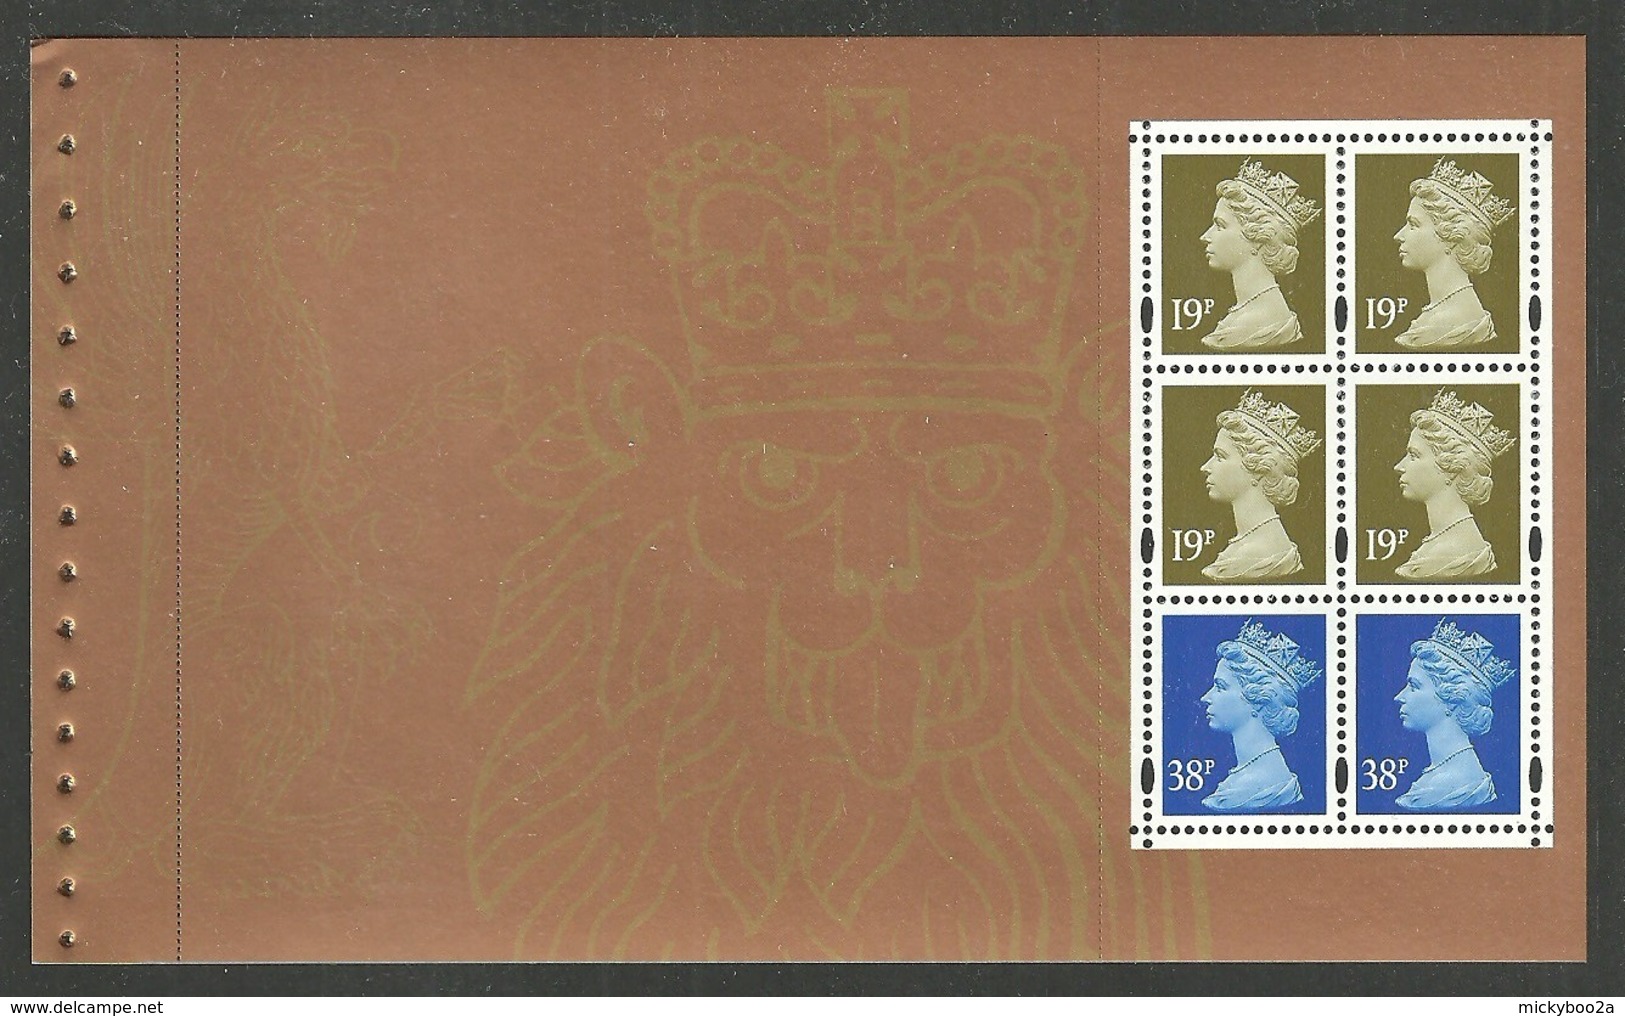 GB 2000 PRESTIGE BOOKLET SPECIAL BY DESIGN MACHIN MIXED VALUES BOOKLET PANE MNH - Unused Stamps